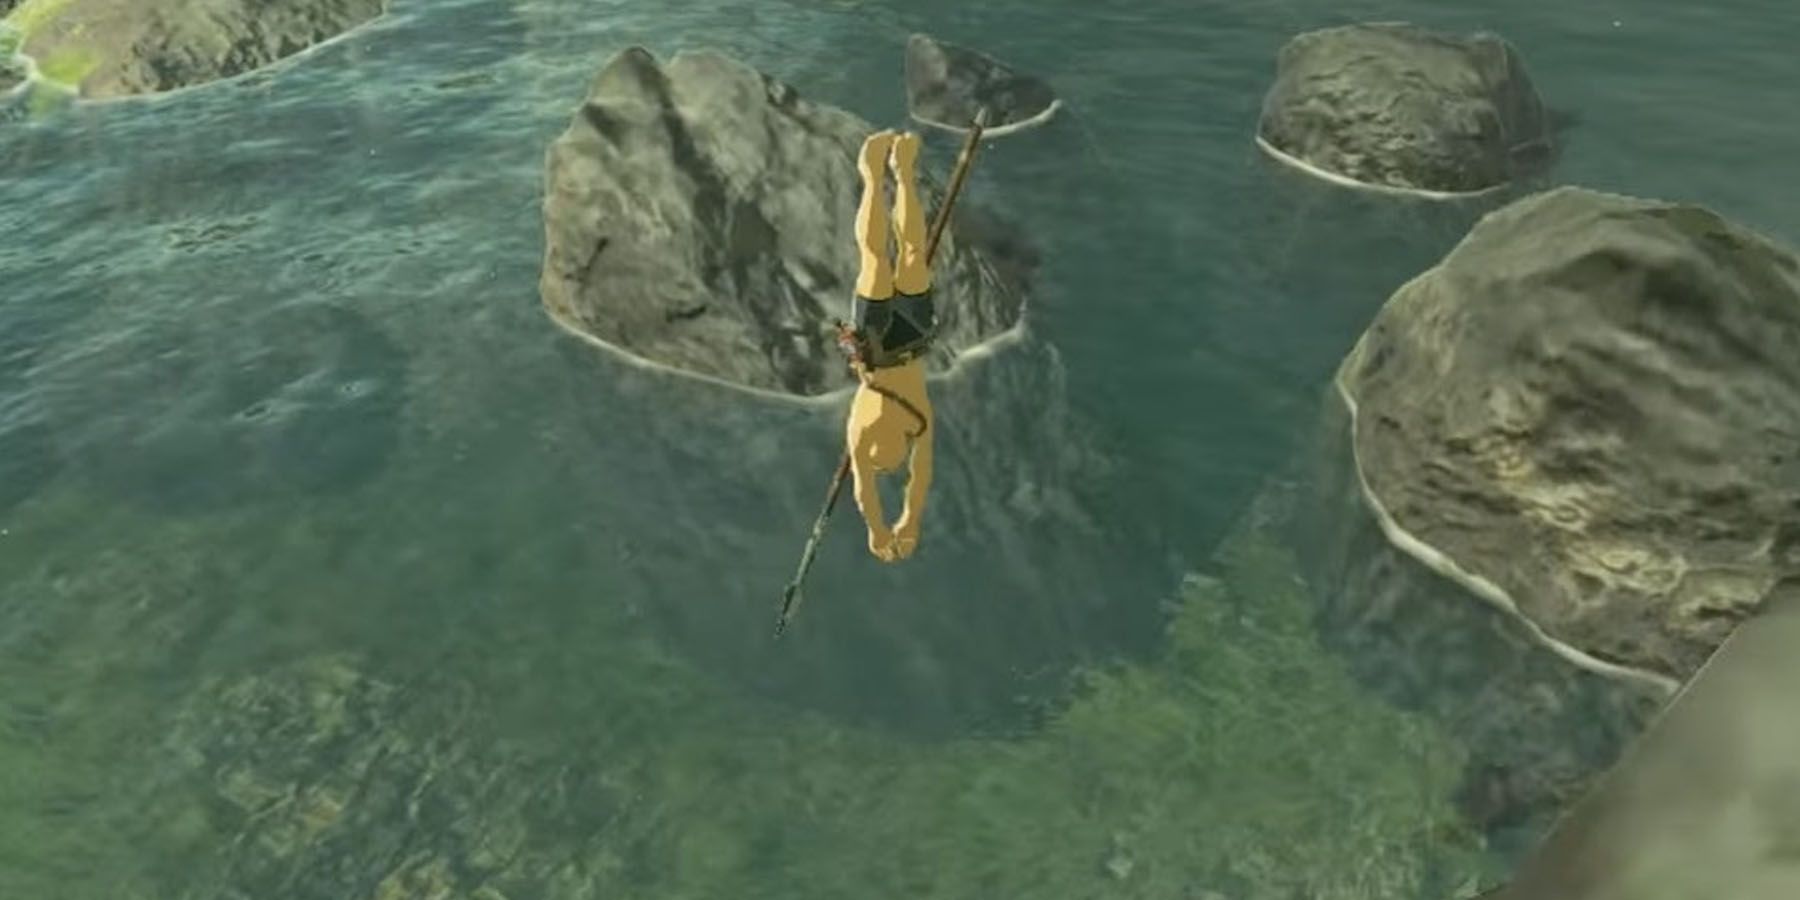 A screenshot of Link jumping off a cliff in The Legend of Zelda: Breath of the Wild.